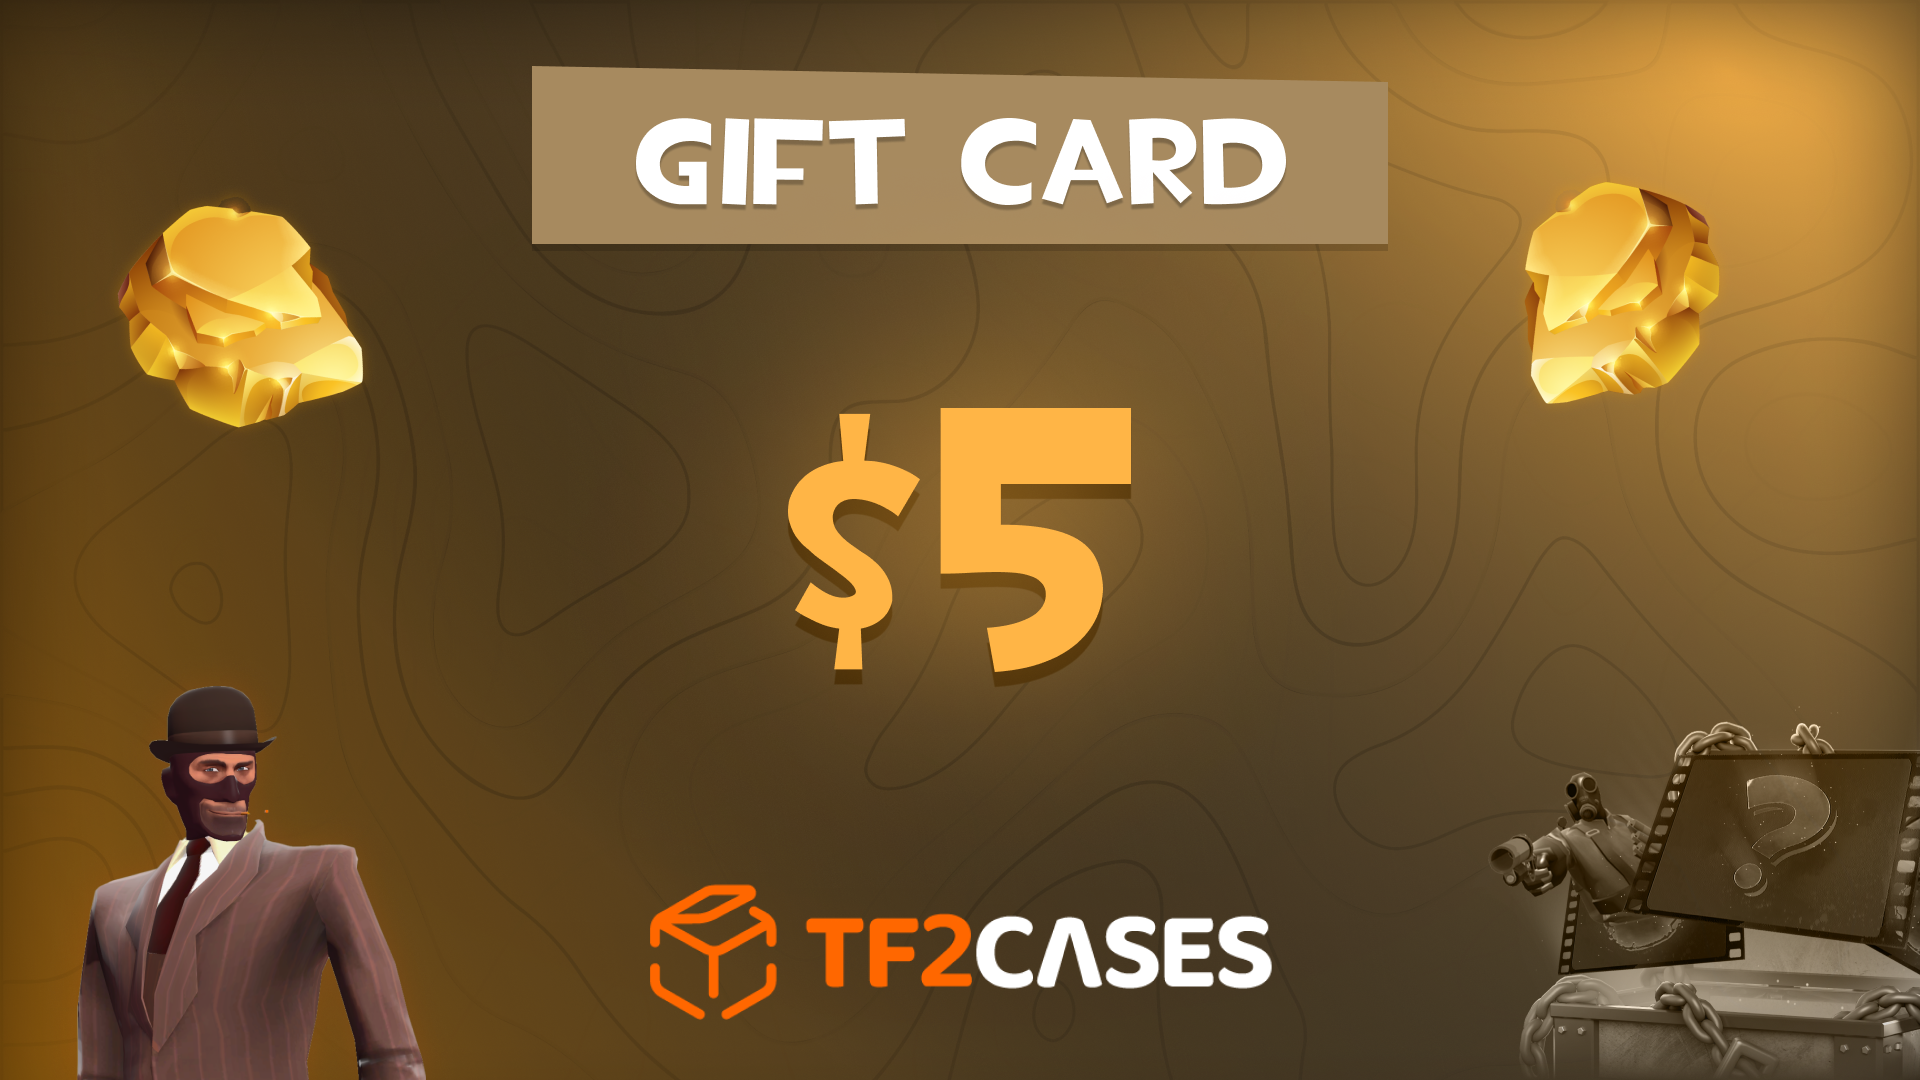 (5.65$) TF2CASES.com $5 Gift Card